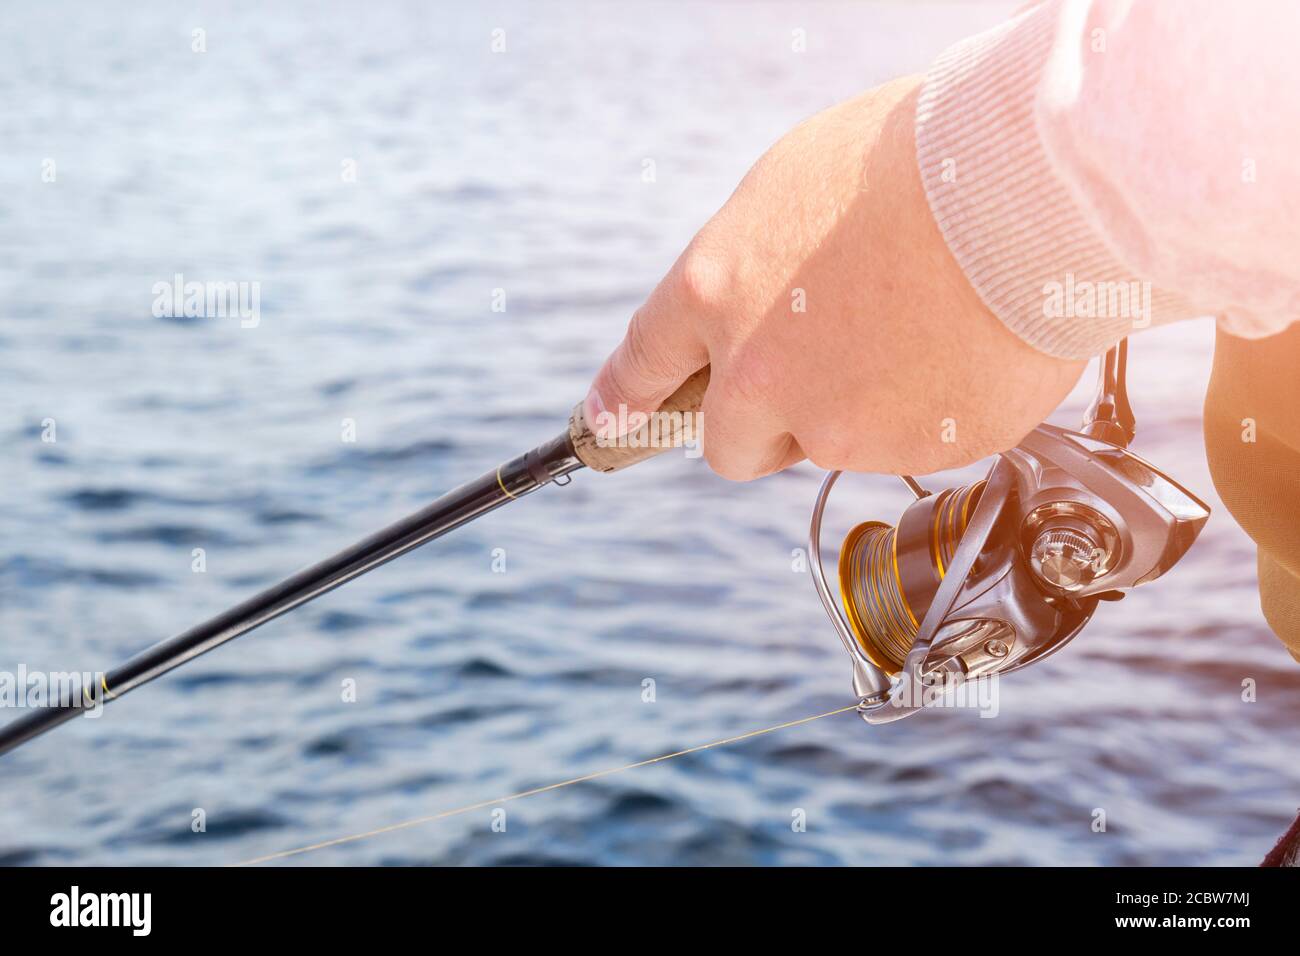 Closeup of a reel fishing rod on a prop and water background Stock Photo -  Alamy